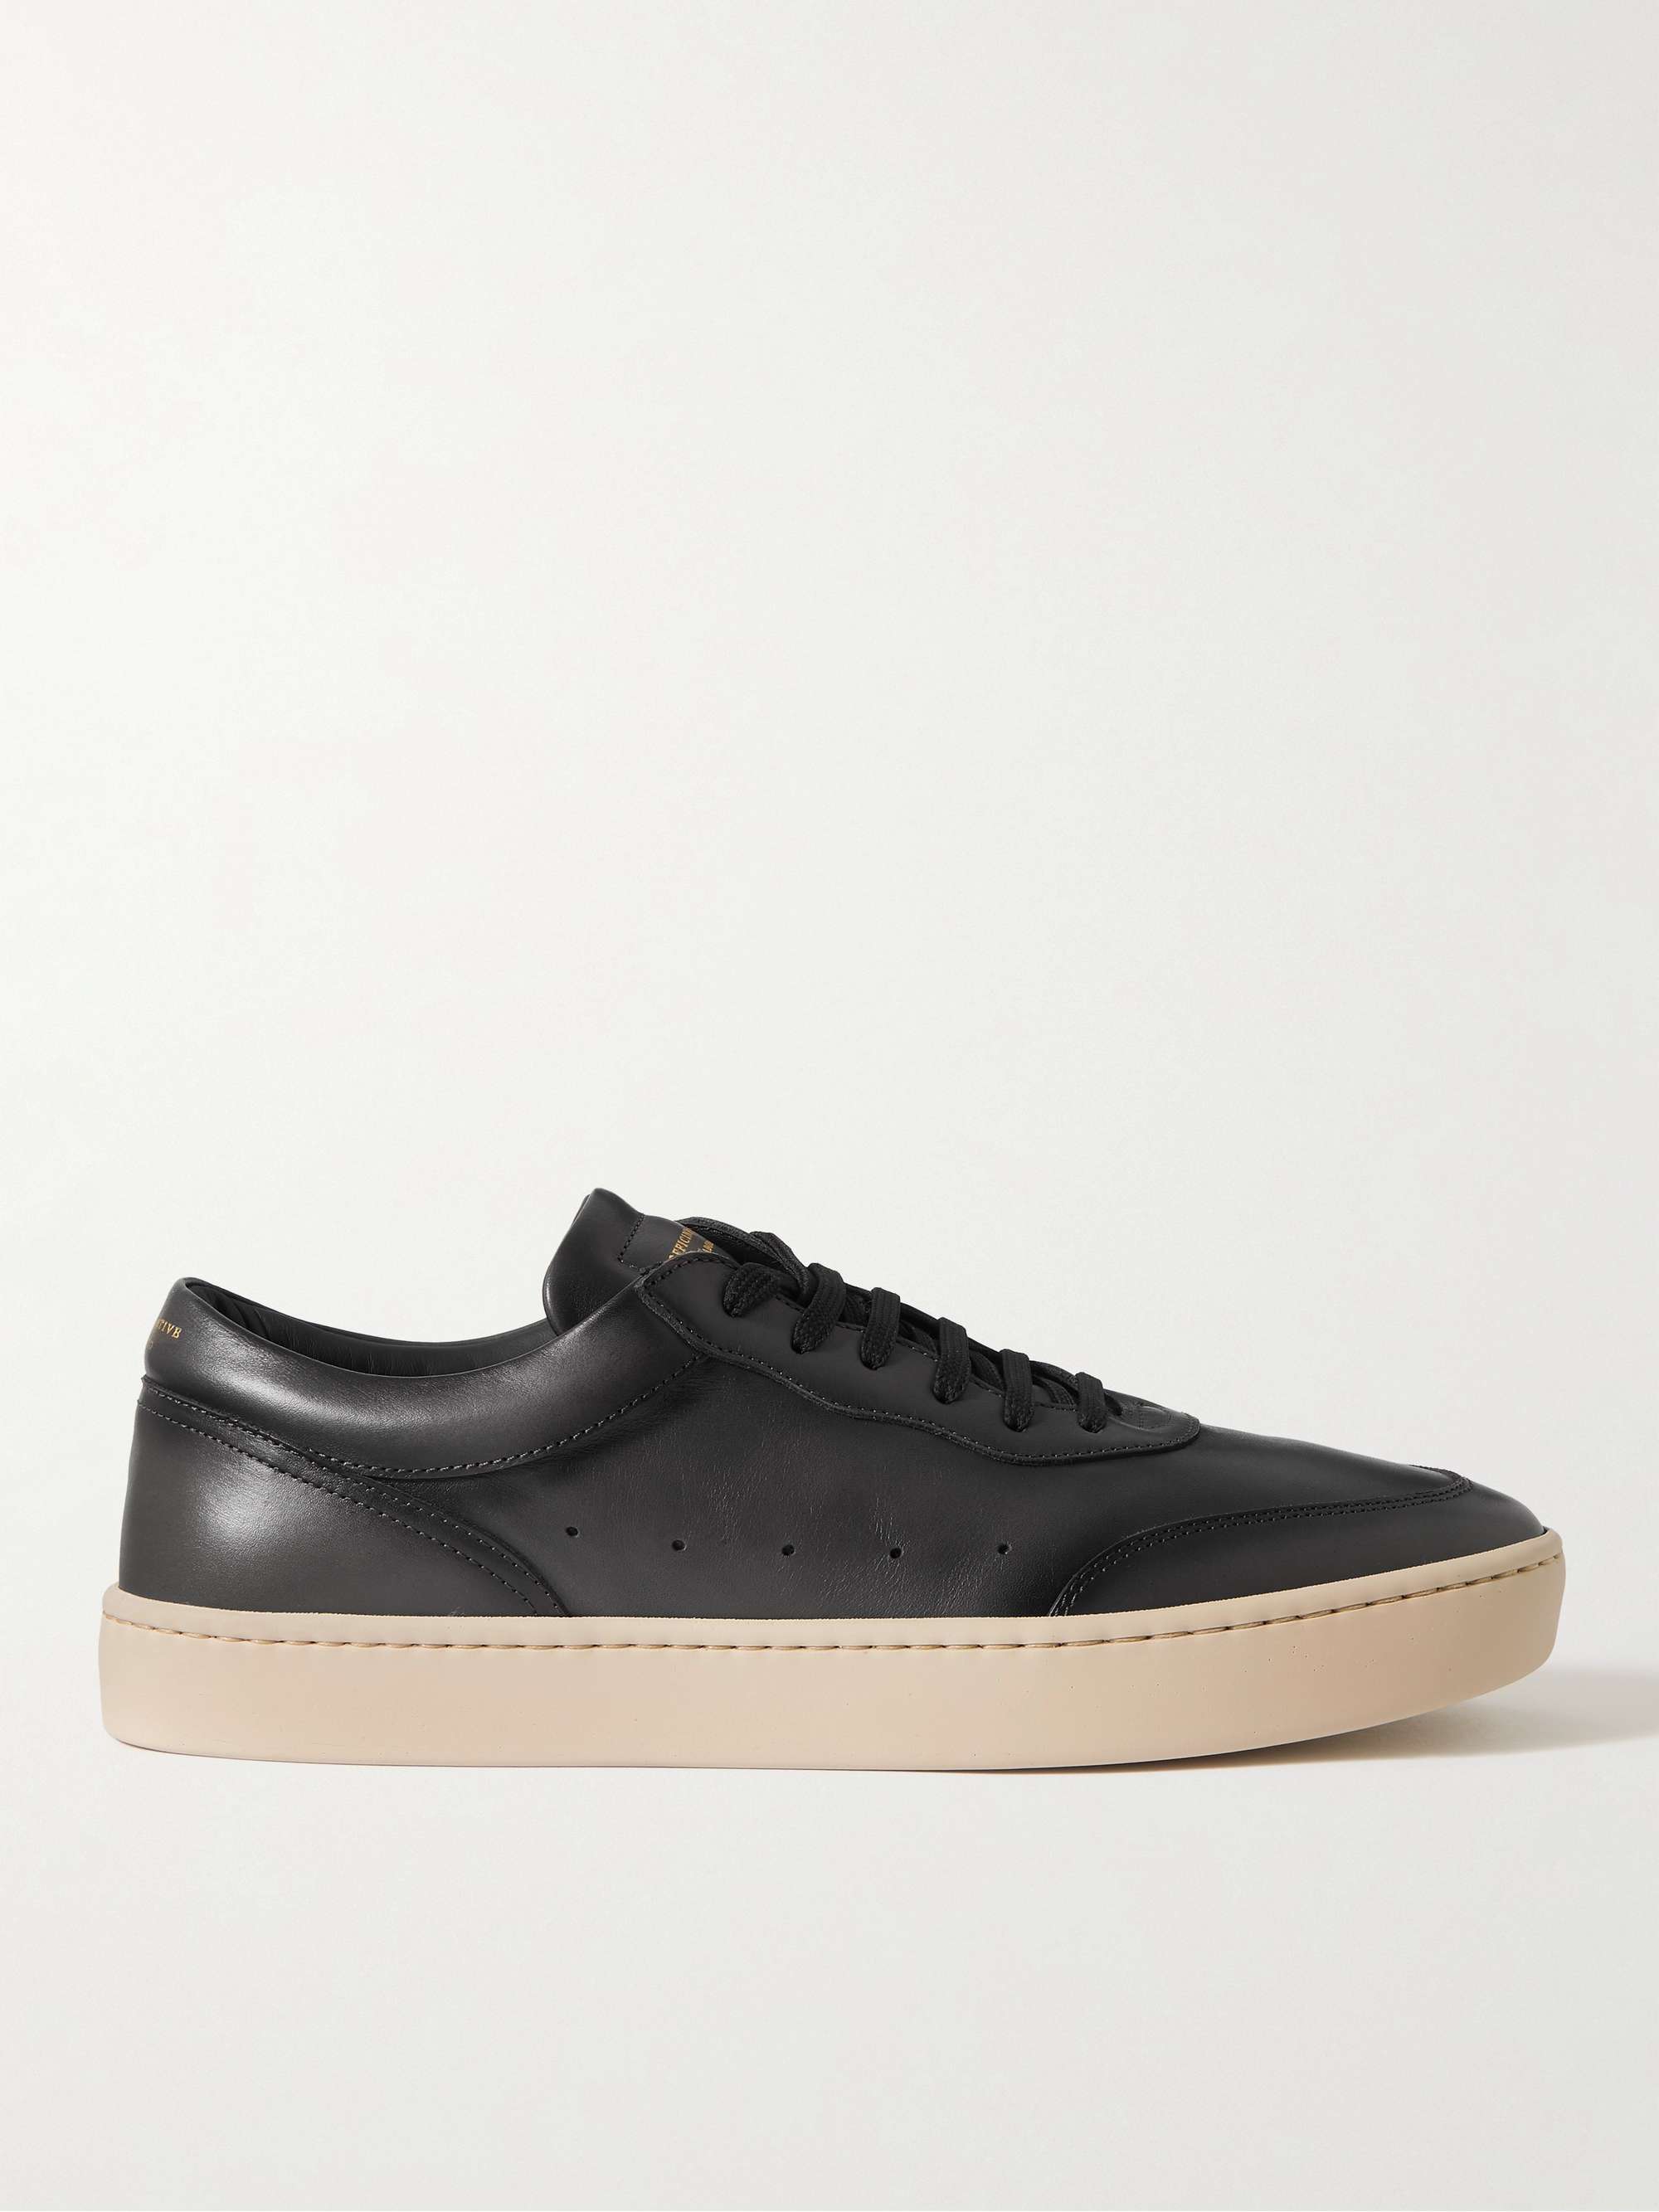 OFFICINE CREATIVE Kyle Lux 001 Leather Sneakers for Men | MR